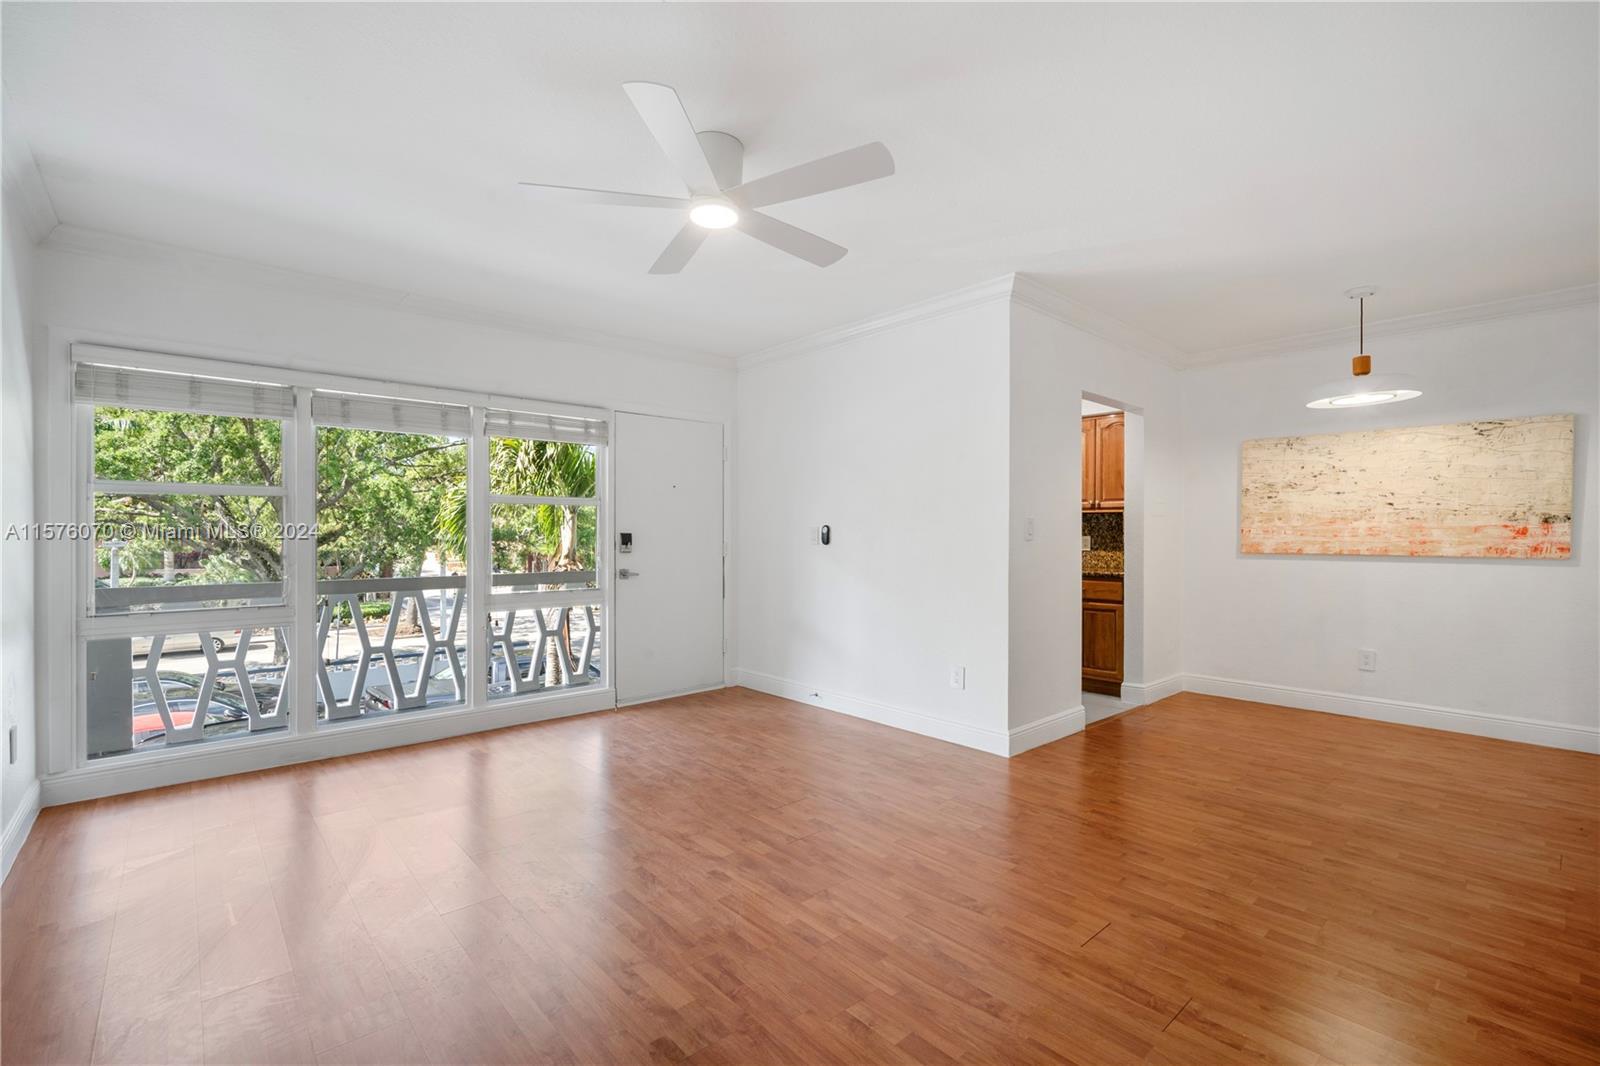 Photo of 21 Edgewater Dr #204 in Coral Gables, FL